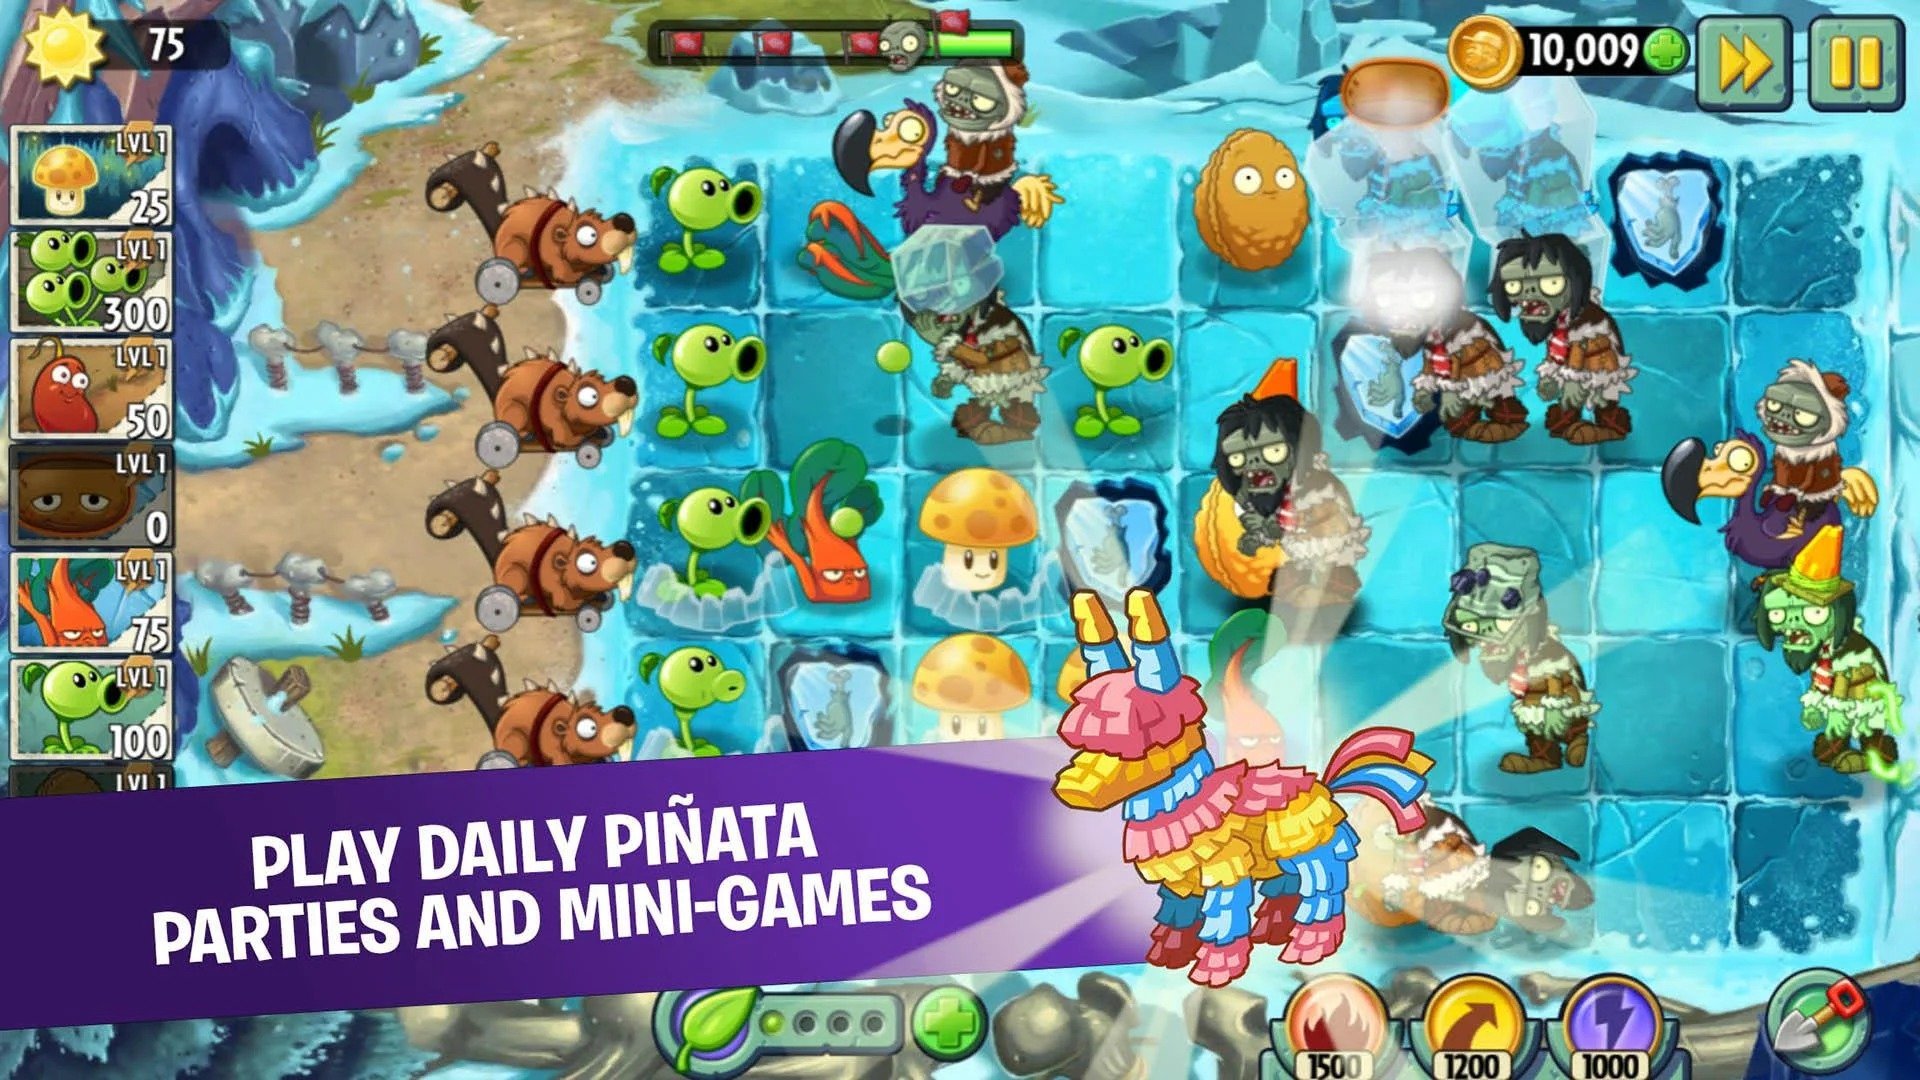 Plants vs Zombies 2 for Android lands in China - Android Community